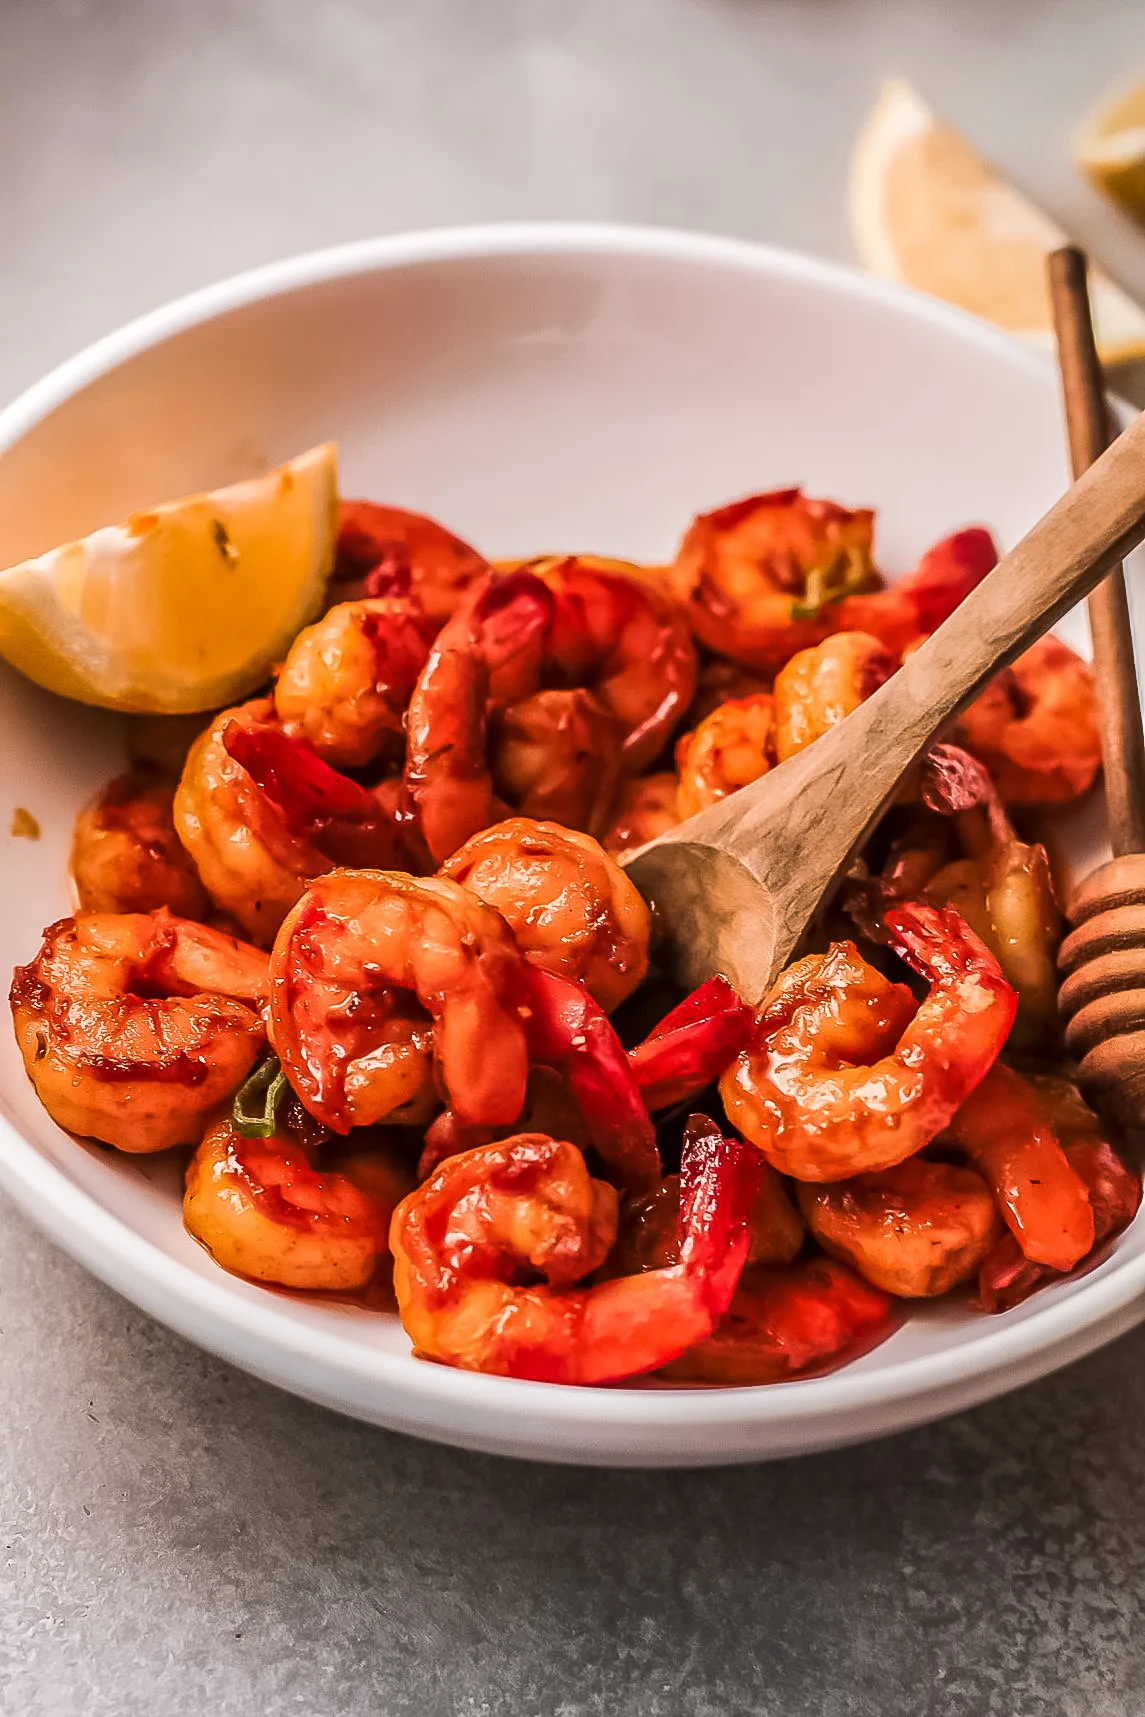 Amazingly flavorful and tender Honey Cajun Shrimp featuring a sweet & spicy sauce. This recipe is so easy to make you won't believe it.